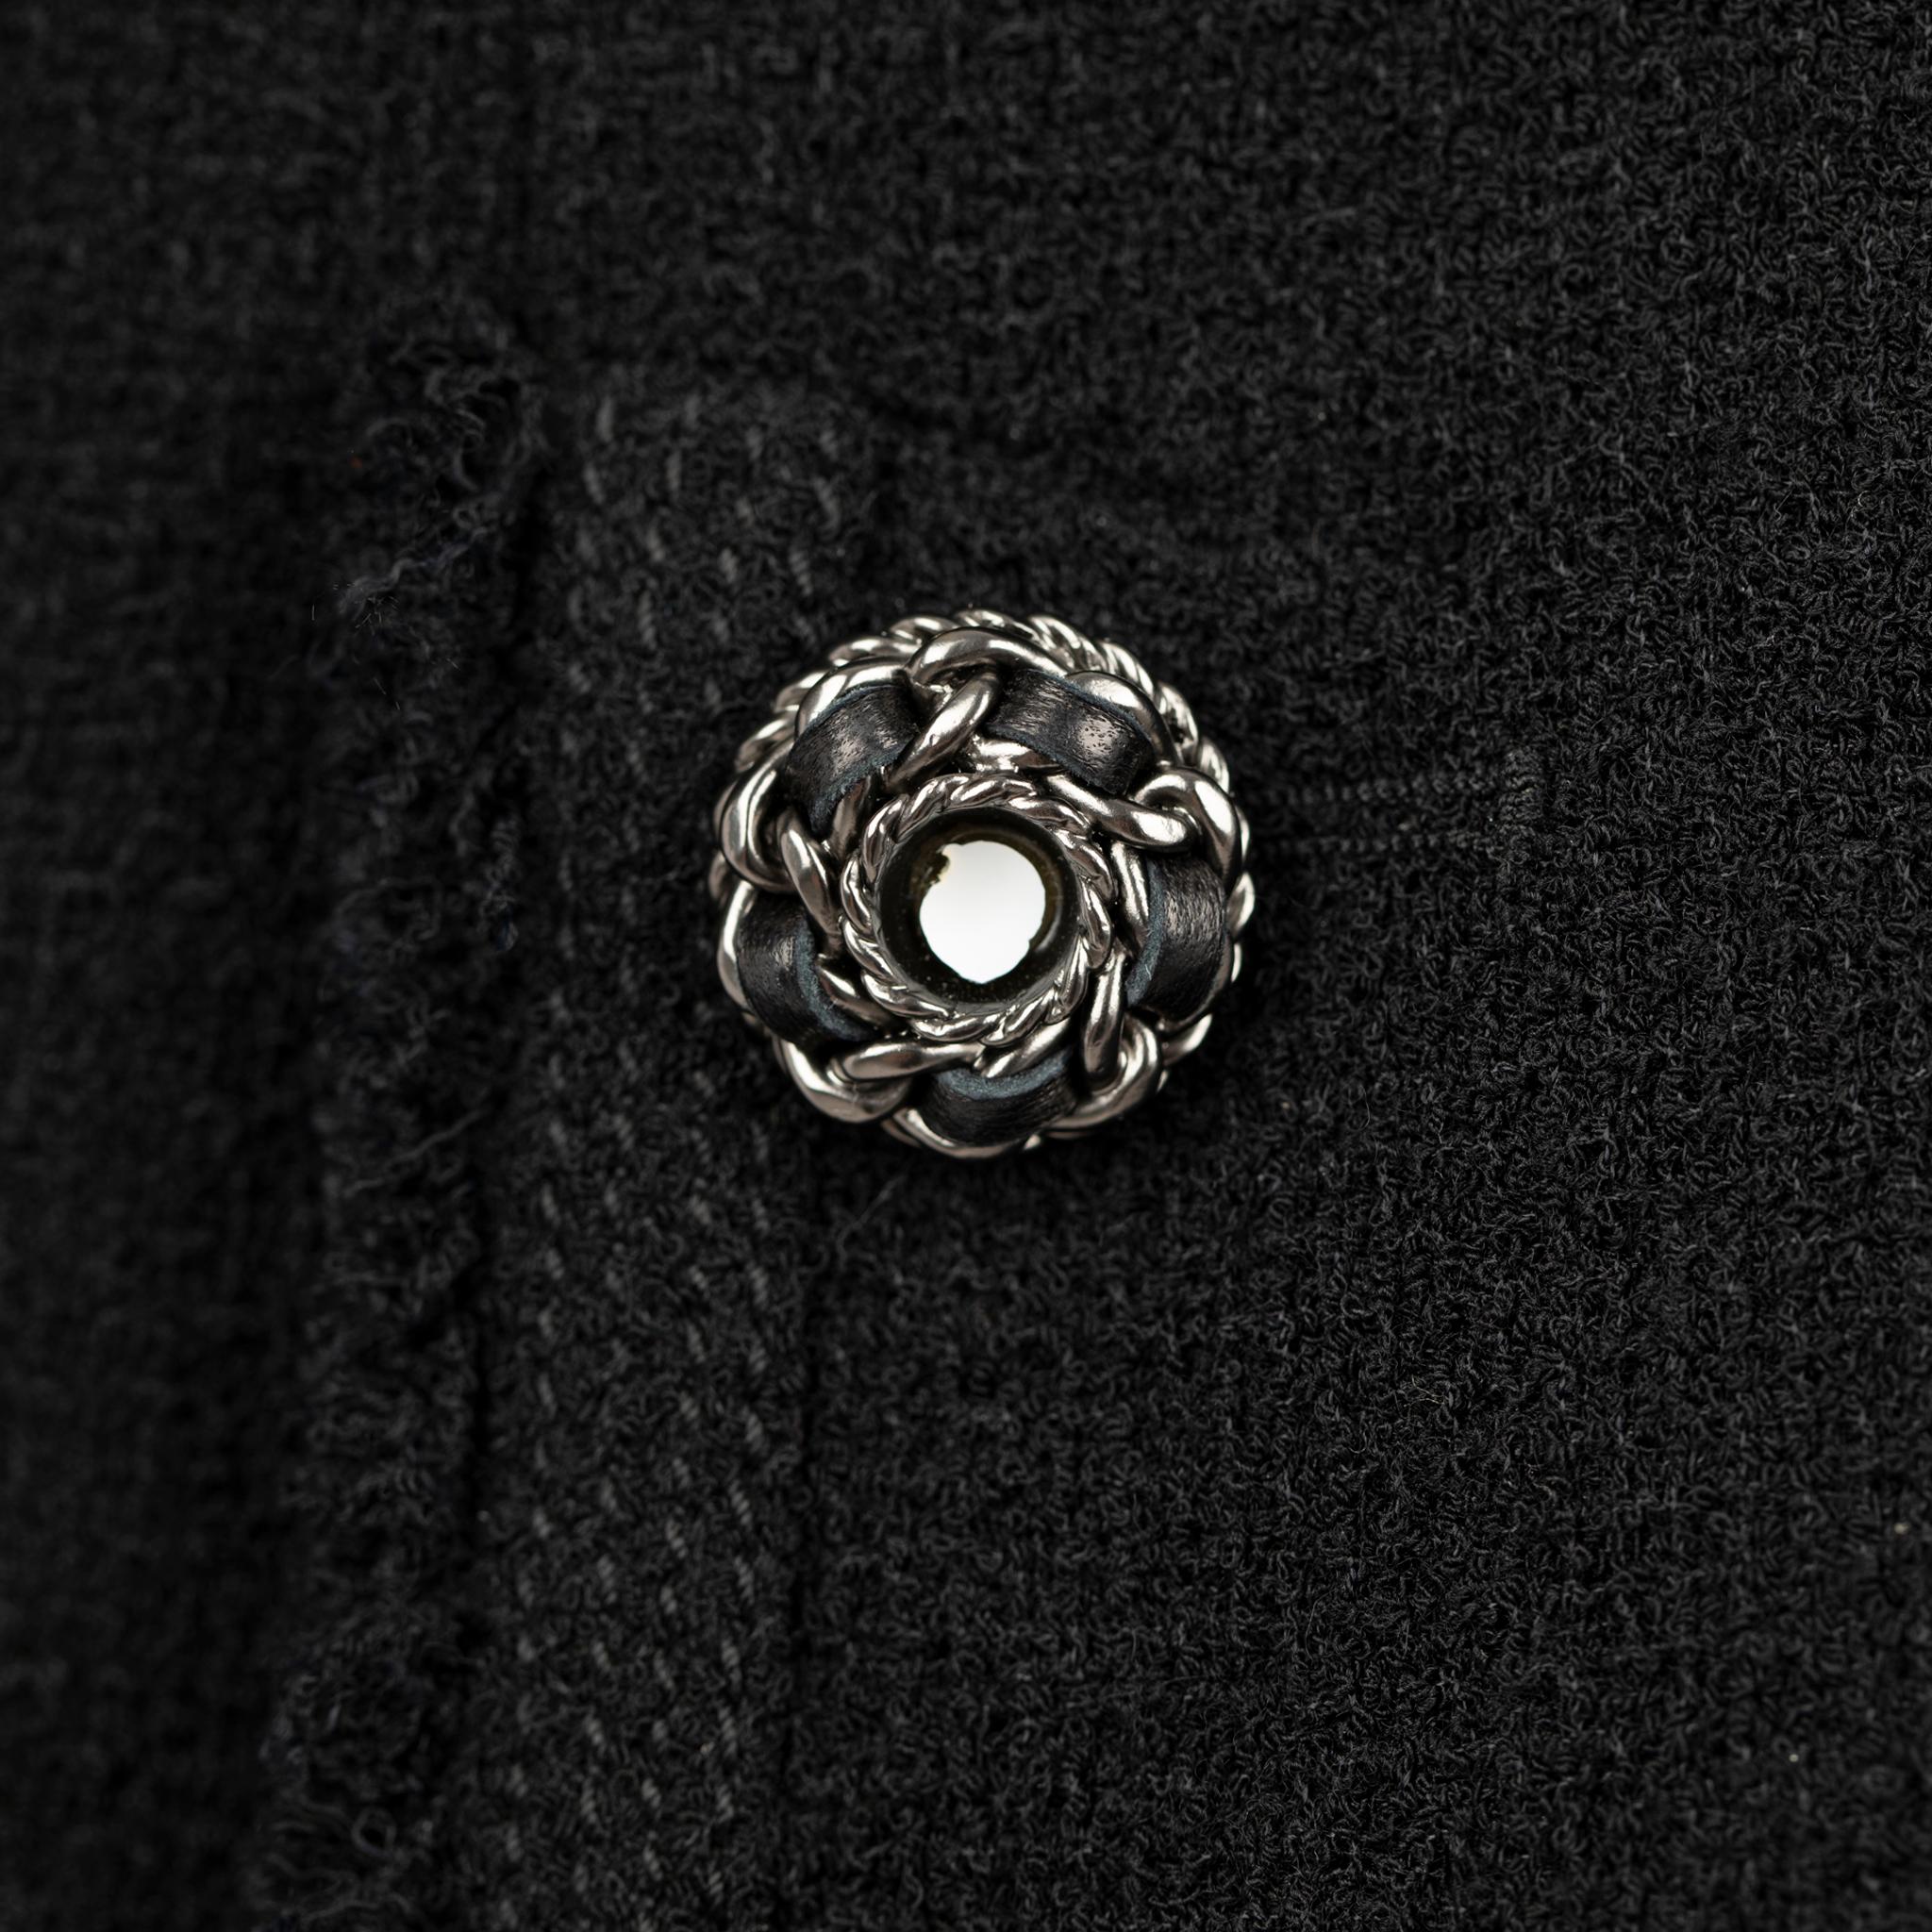 Chanel Black Jacket With Ruthenium Buttons

Brand:

Chanel

Product:

Chanel Black Jacket With Ruthenium Buttons

Size:

36 Fr

Colour:

Black

Material:

Wool 85%, Polyamide 15%

Product Code:

P37602V21840

Condition:

Preloved;